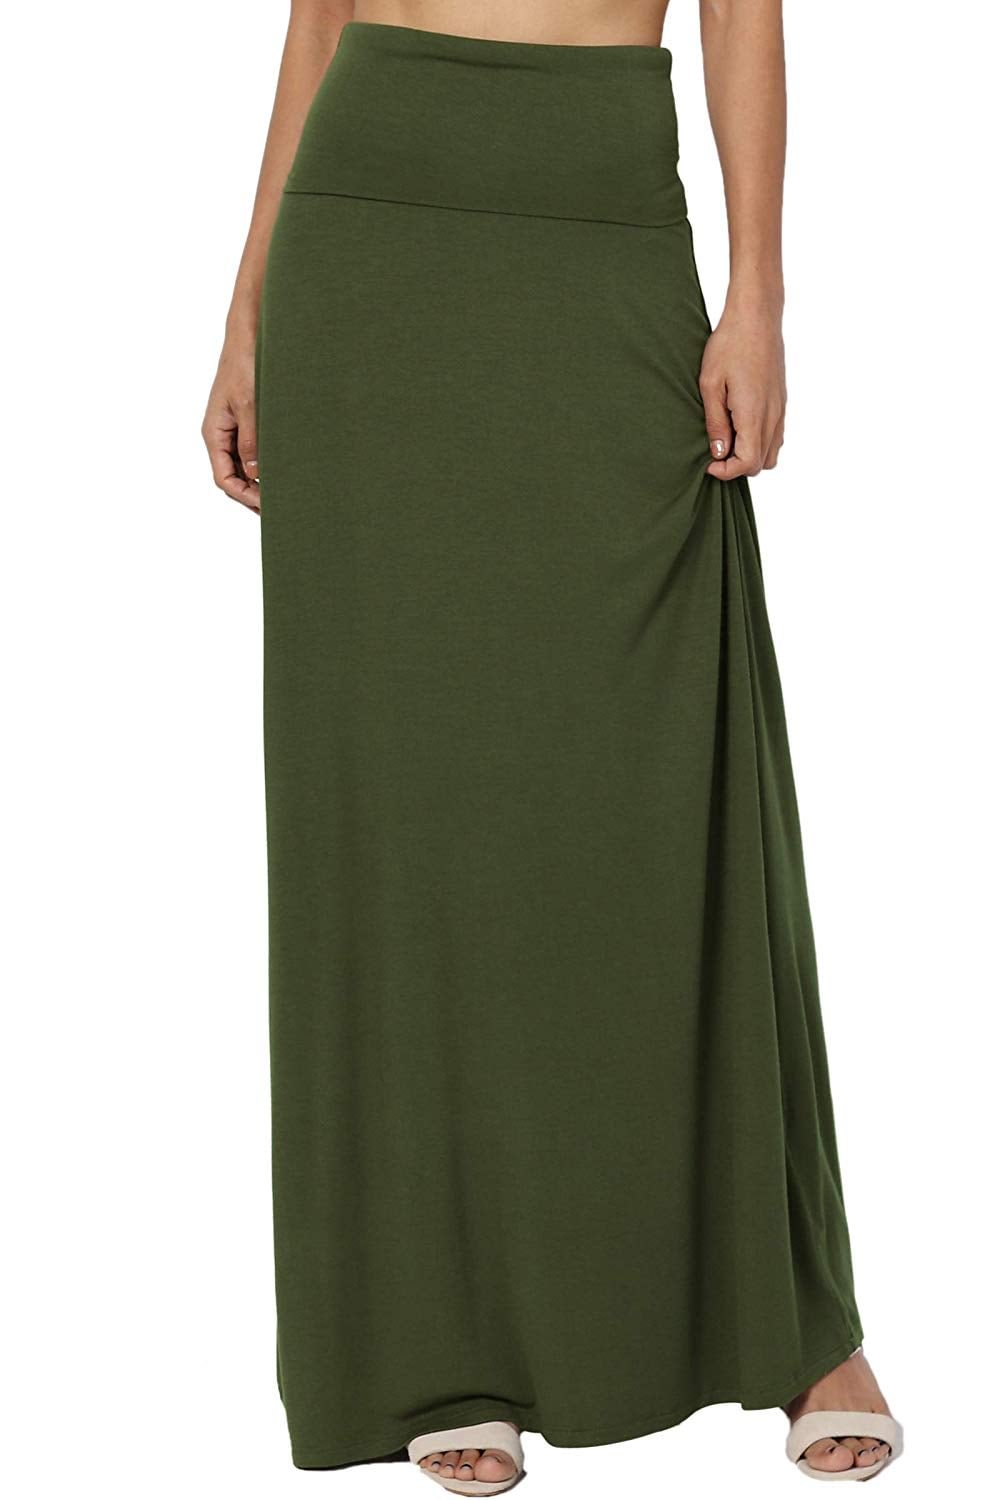 S~3XL Women's Casual Lounge Solid Draped Jersey Relaxed Long Maxi Skirt